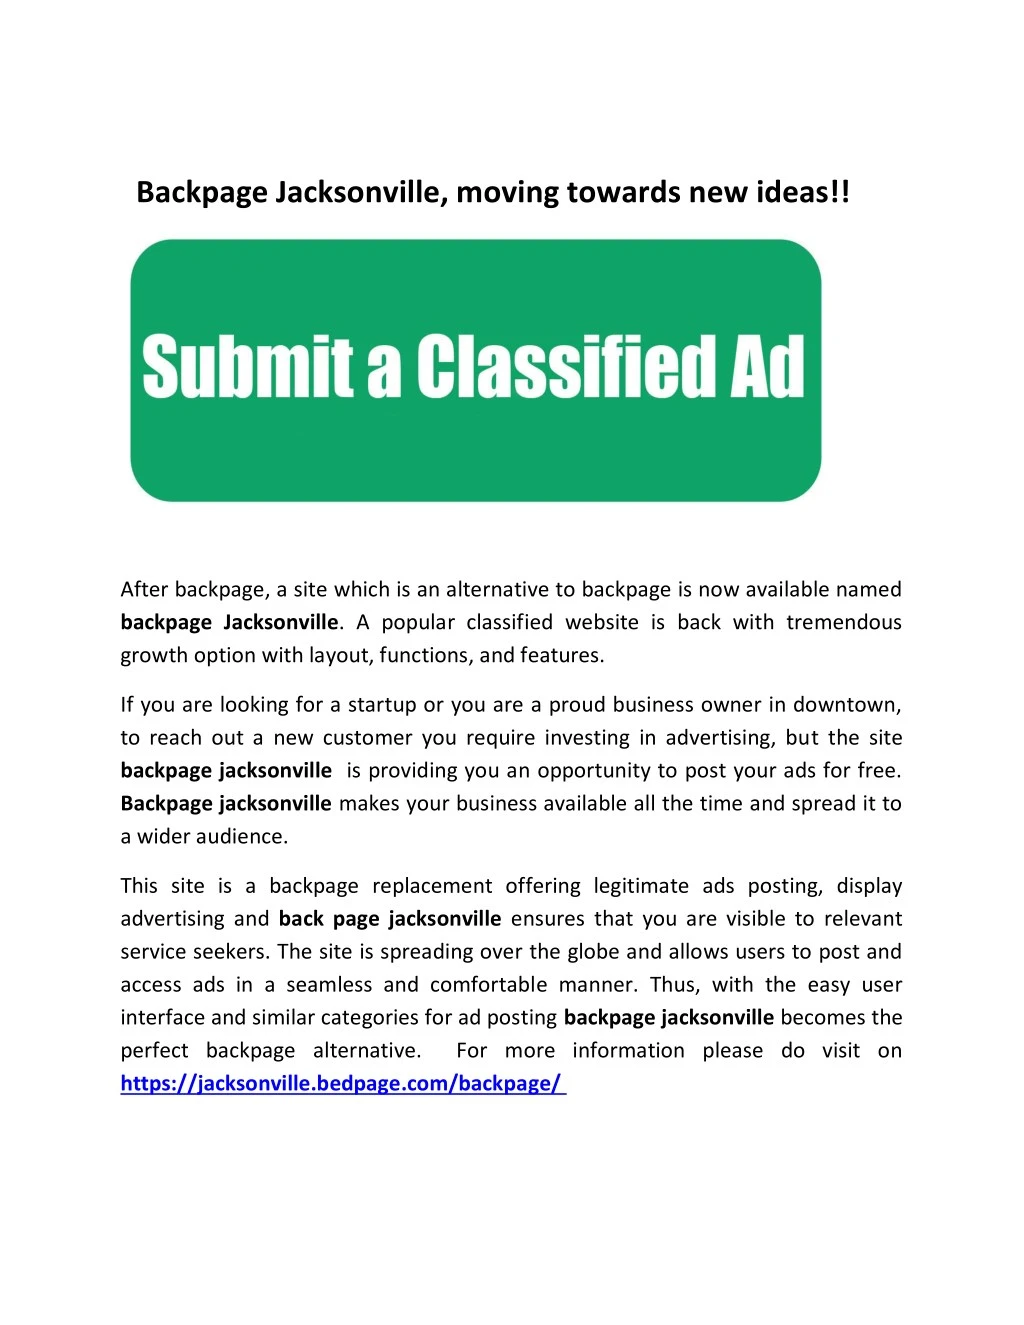 backpage jacksonville moving towards new ideas